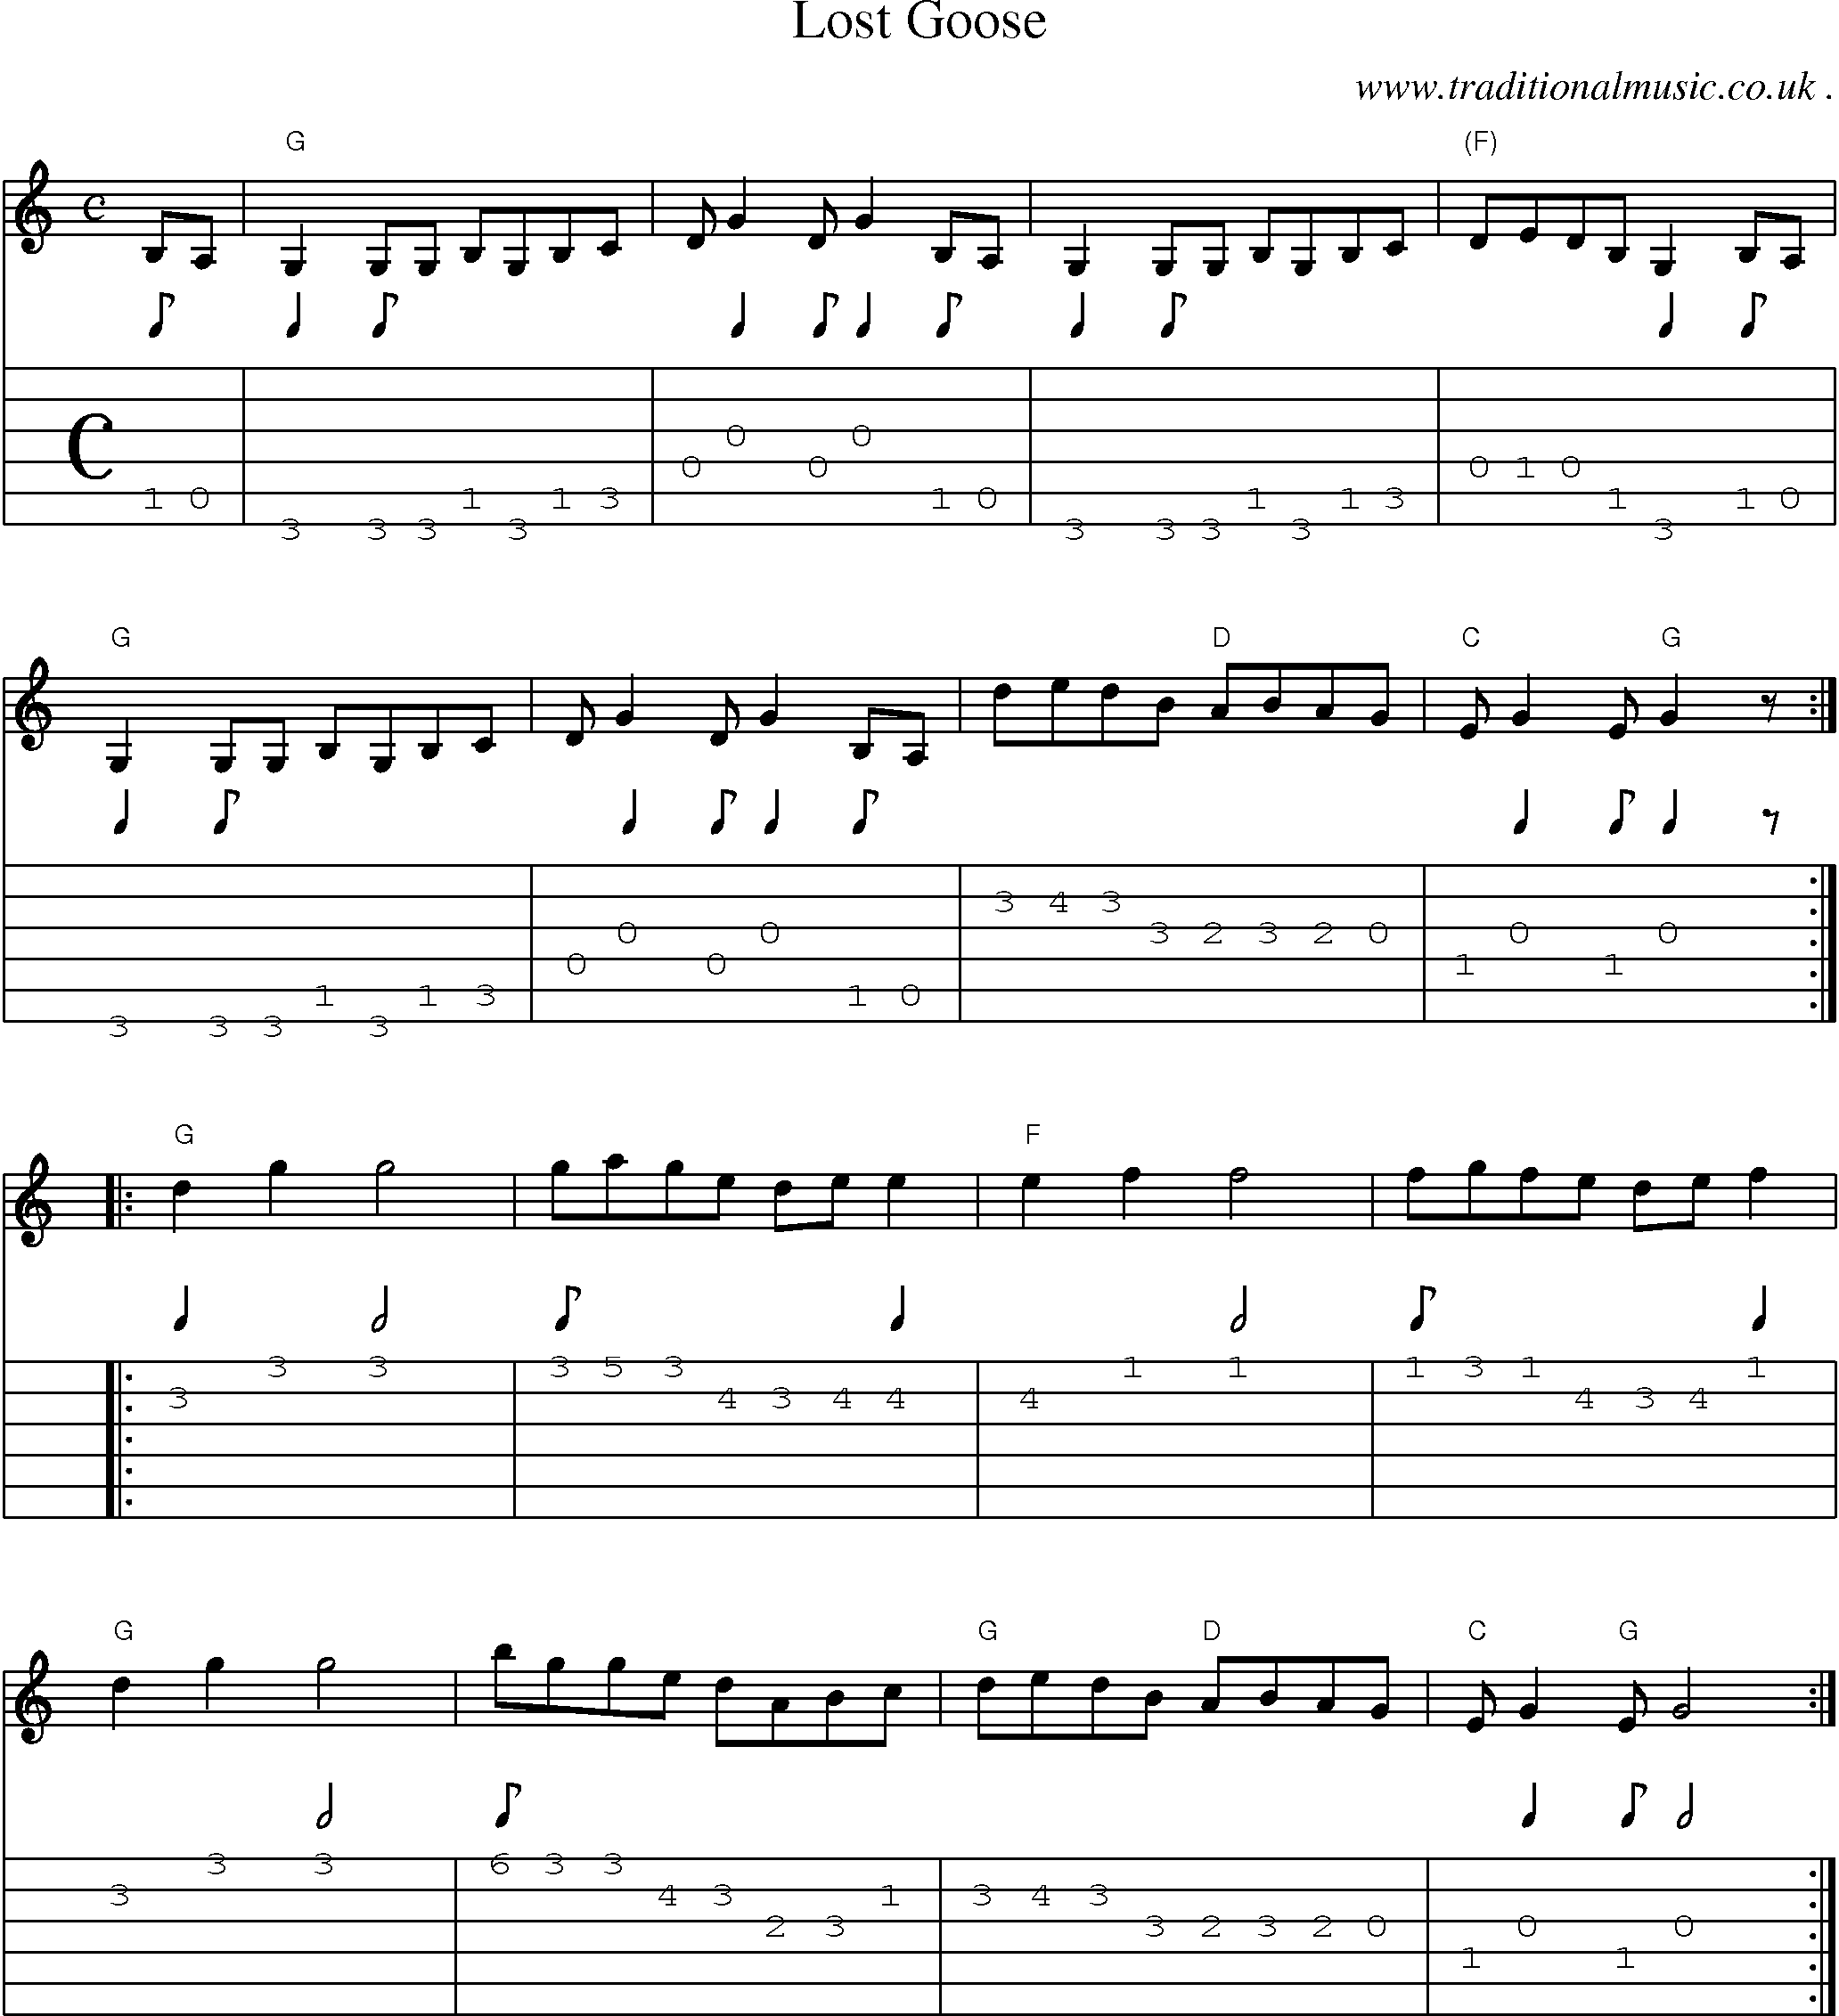 Music Score and Guitar Tabs for Lost Goose